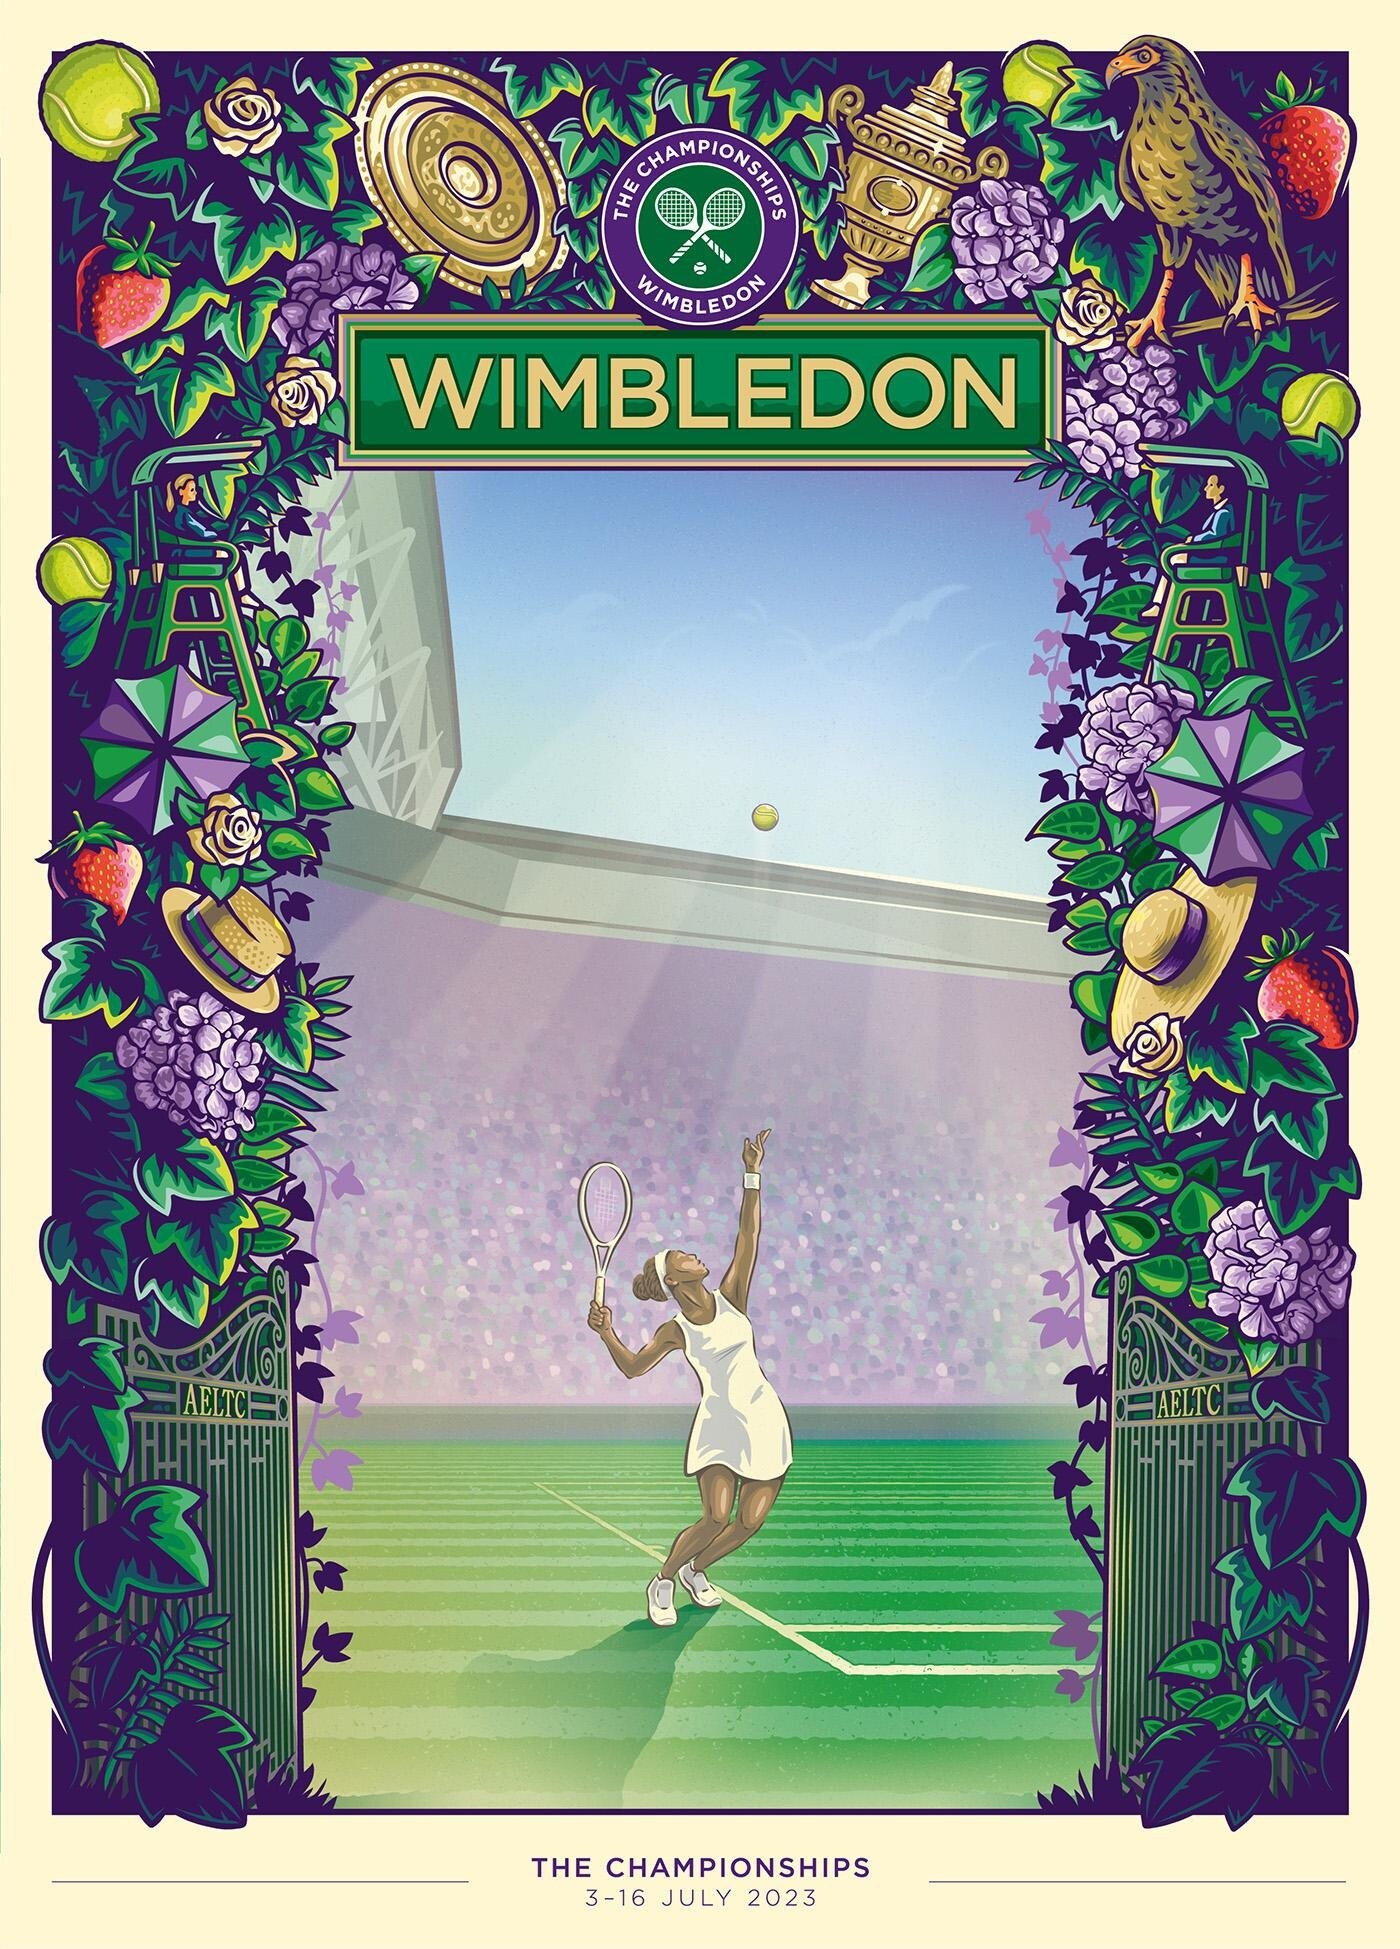 Wimbledon 2023 Posters, 3-16 July 2023 Posters